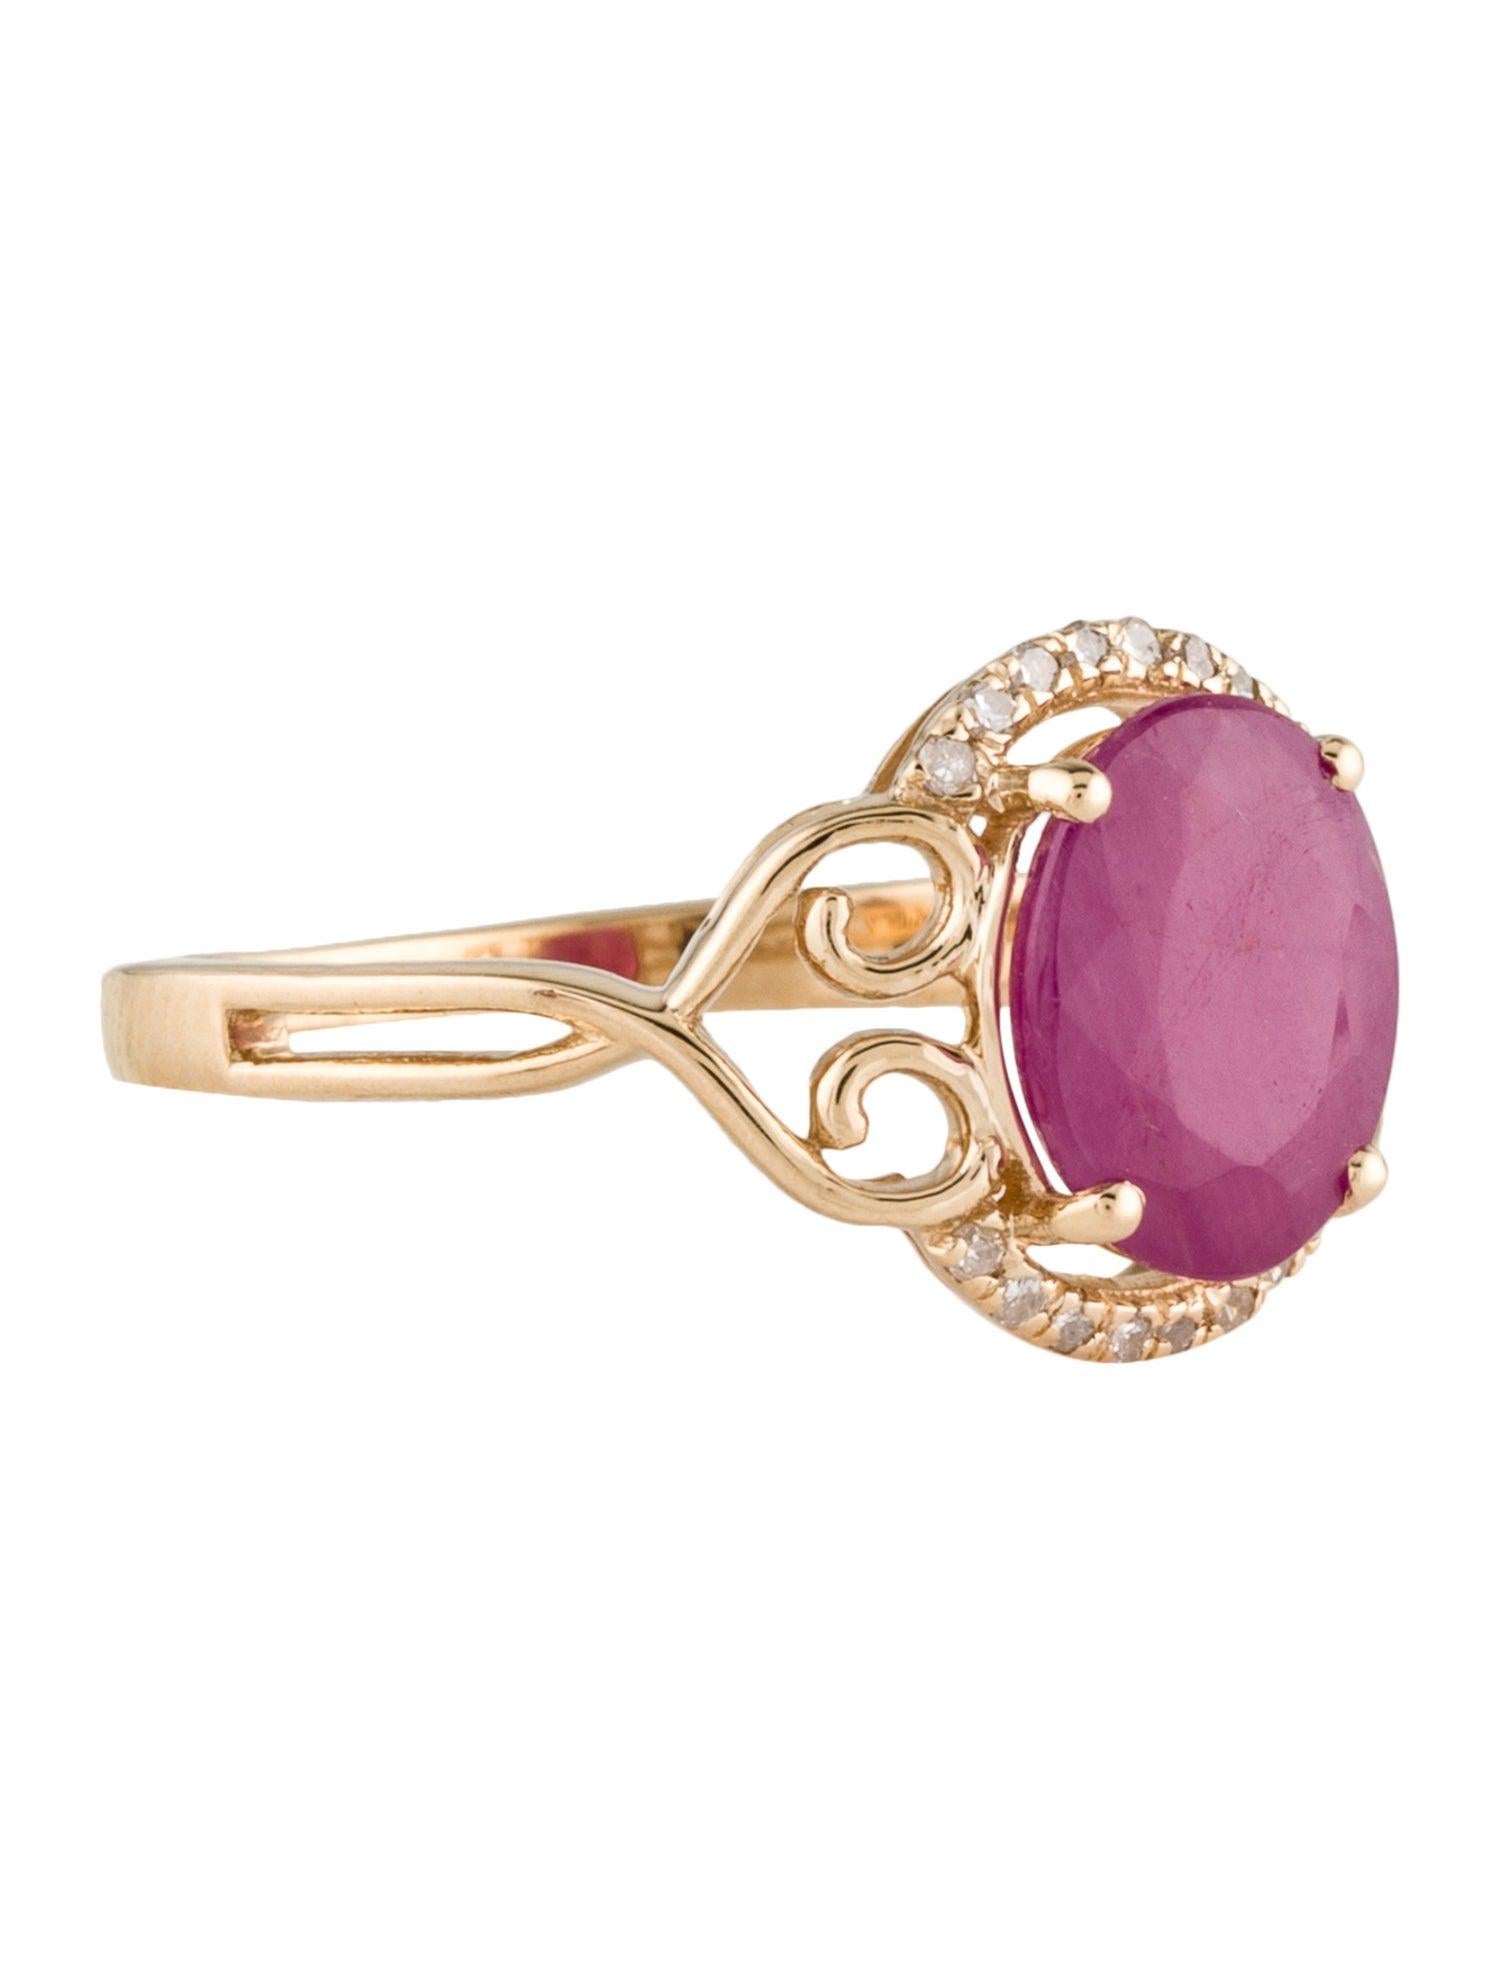 Indulge in the allure of nature's passionate blooms with our Blooms of Passion Ruby and Diamond Oval Ring from Jeweltique. This exquisite piece is a testament to the meticulous craftsmanship and timeless elegance that defines our brand.

Crafted